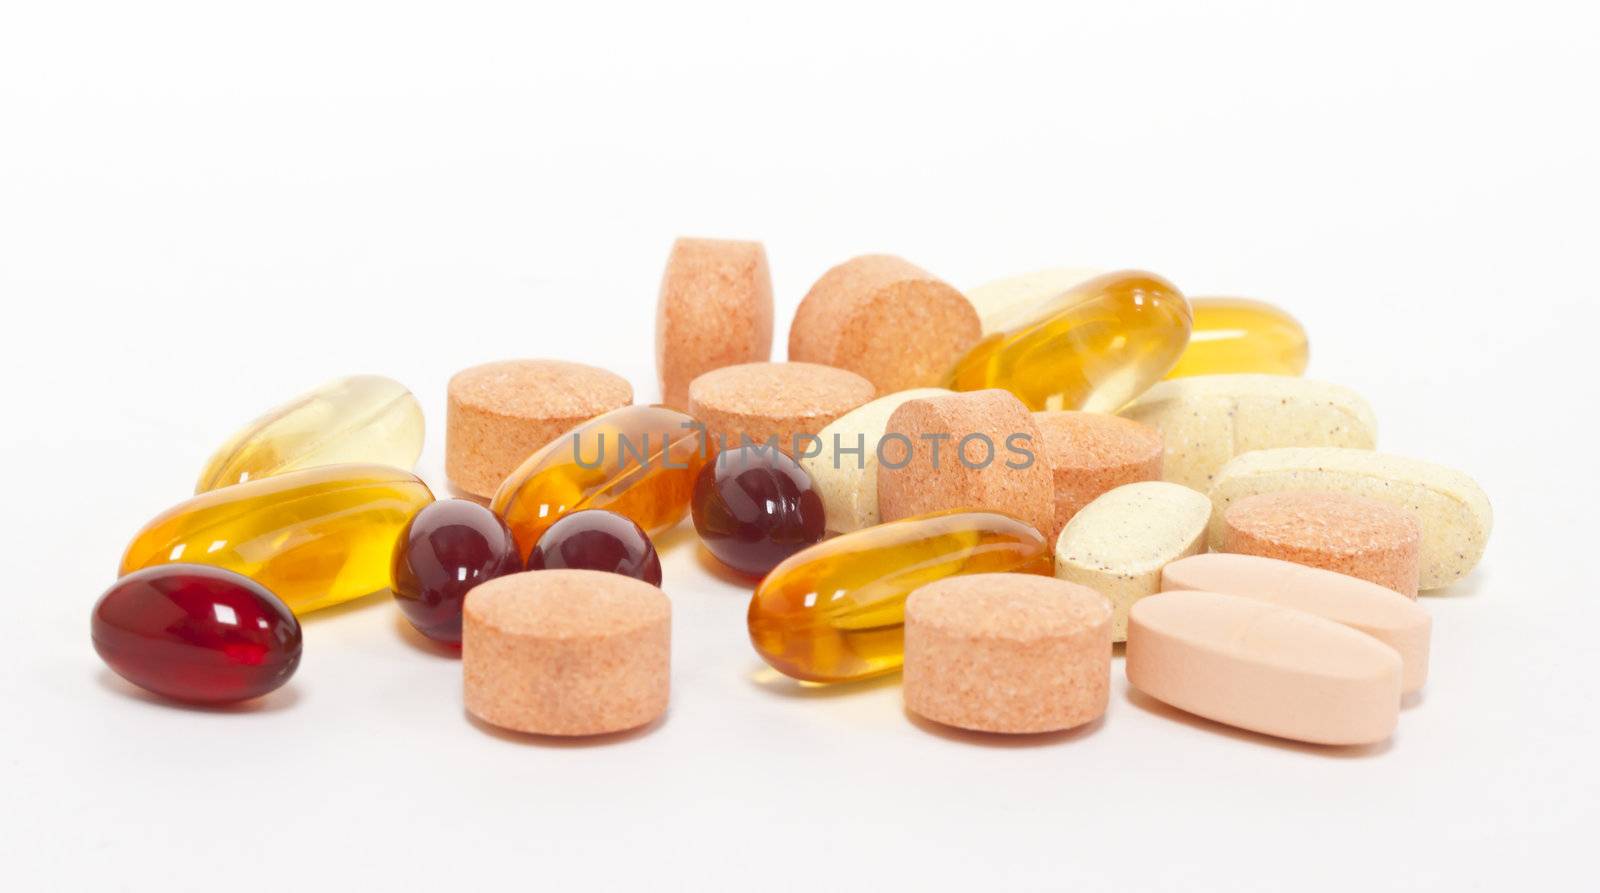 Supplements on white background